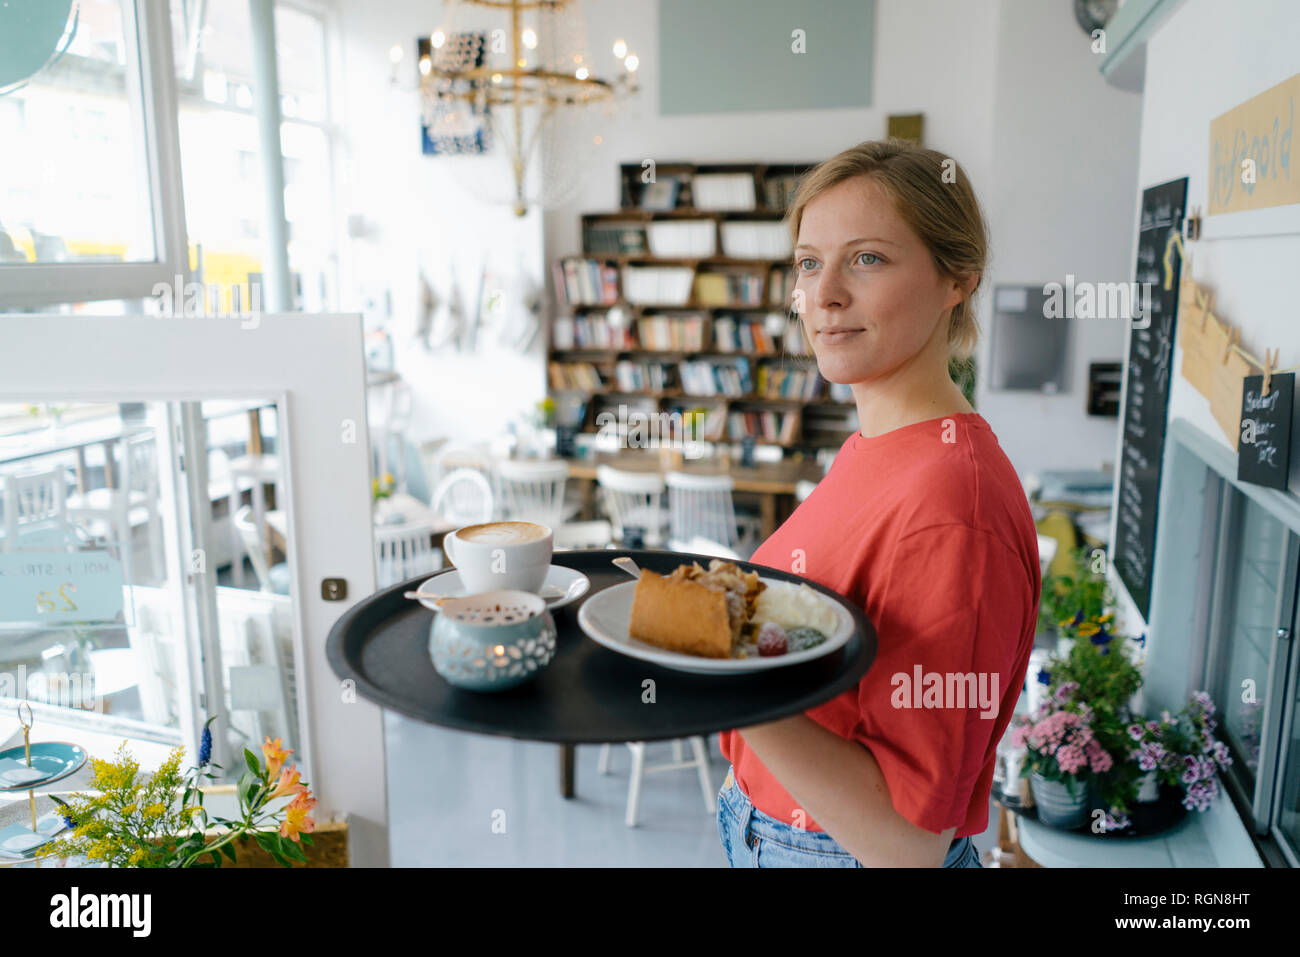 Young woman serving coffee and cake in a cafe Stock Photo